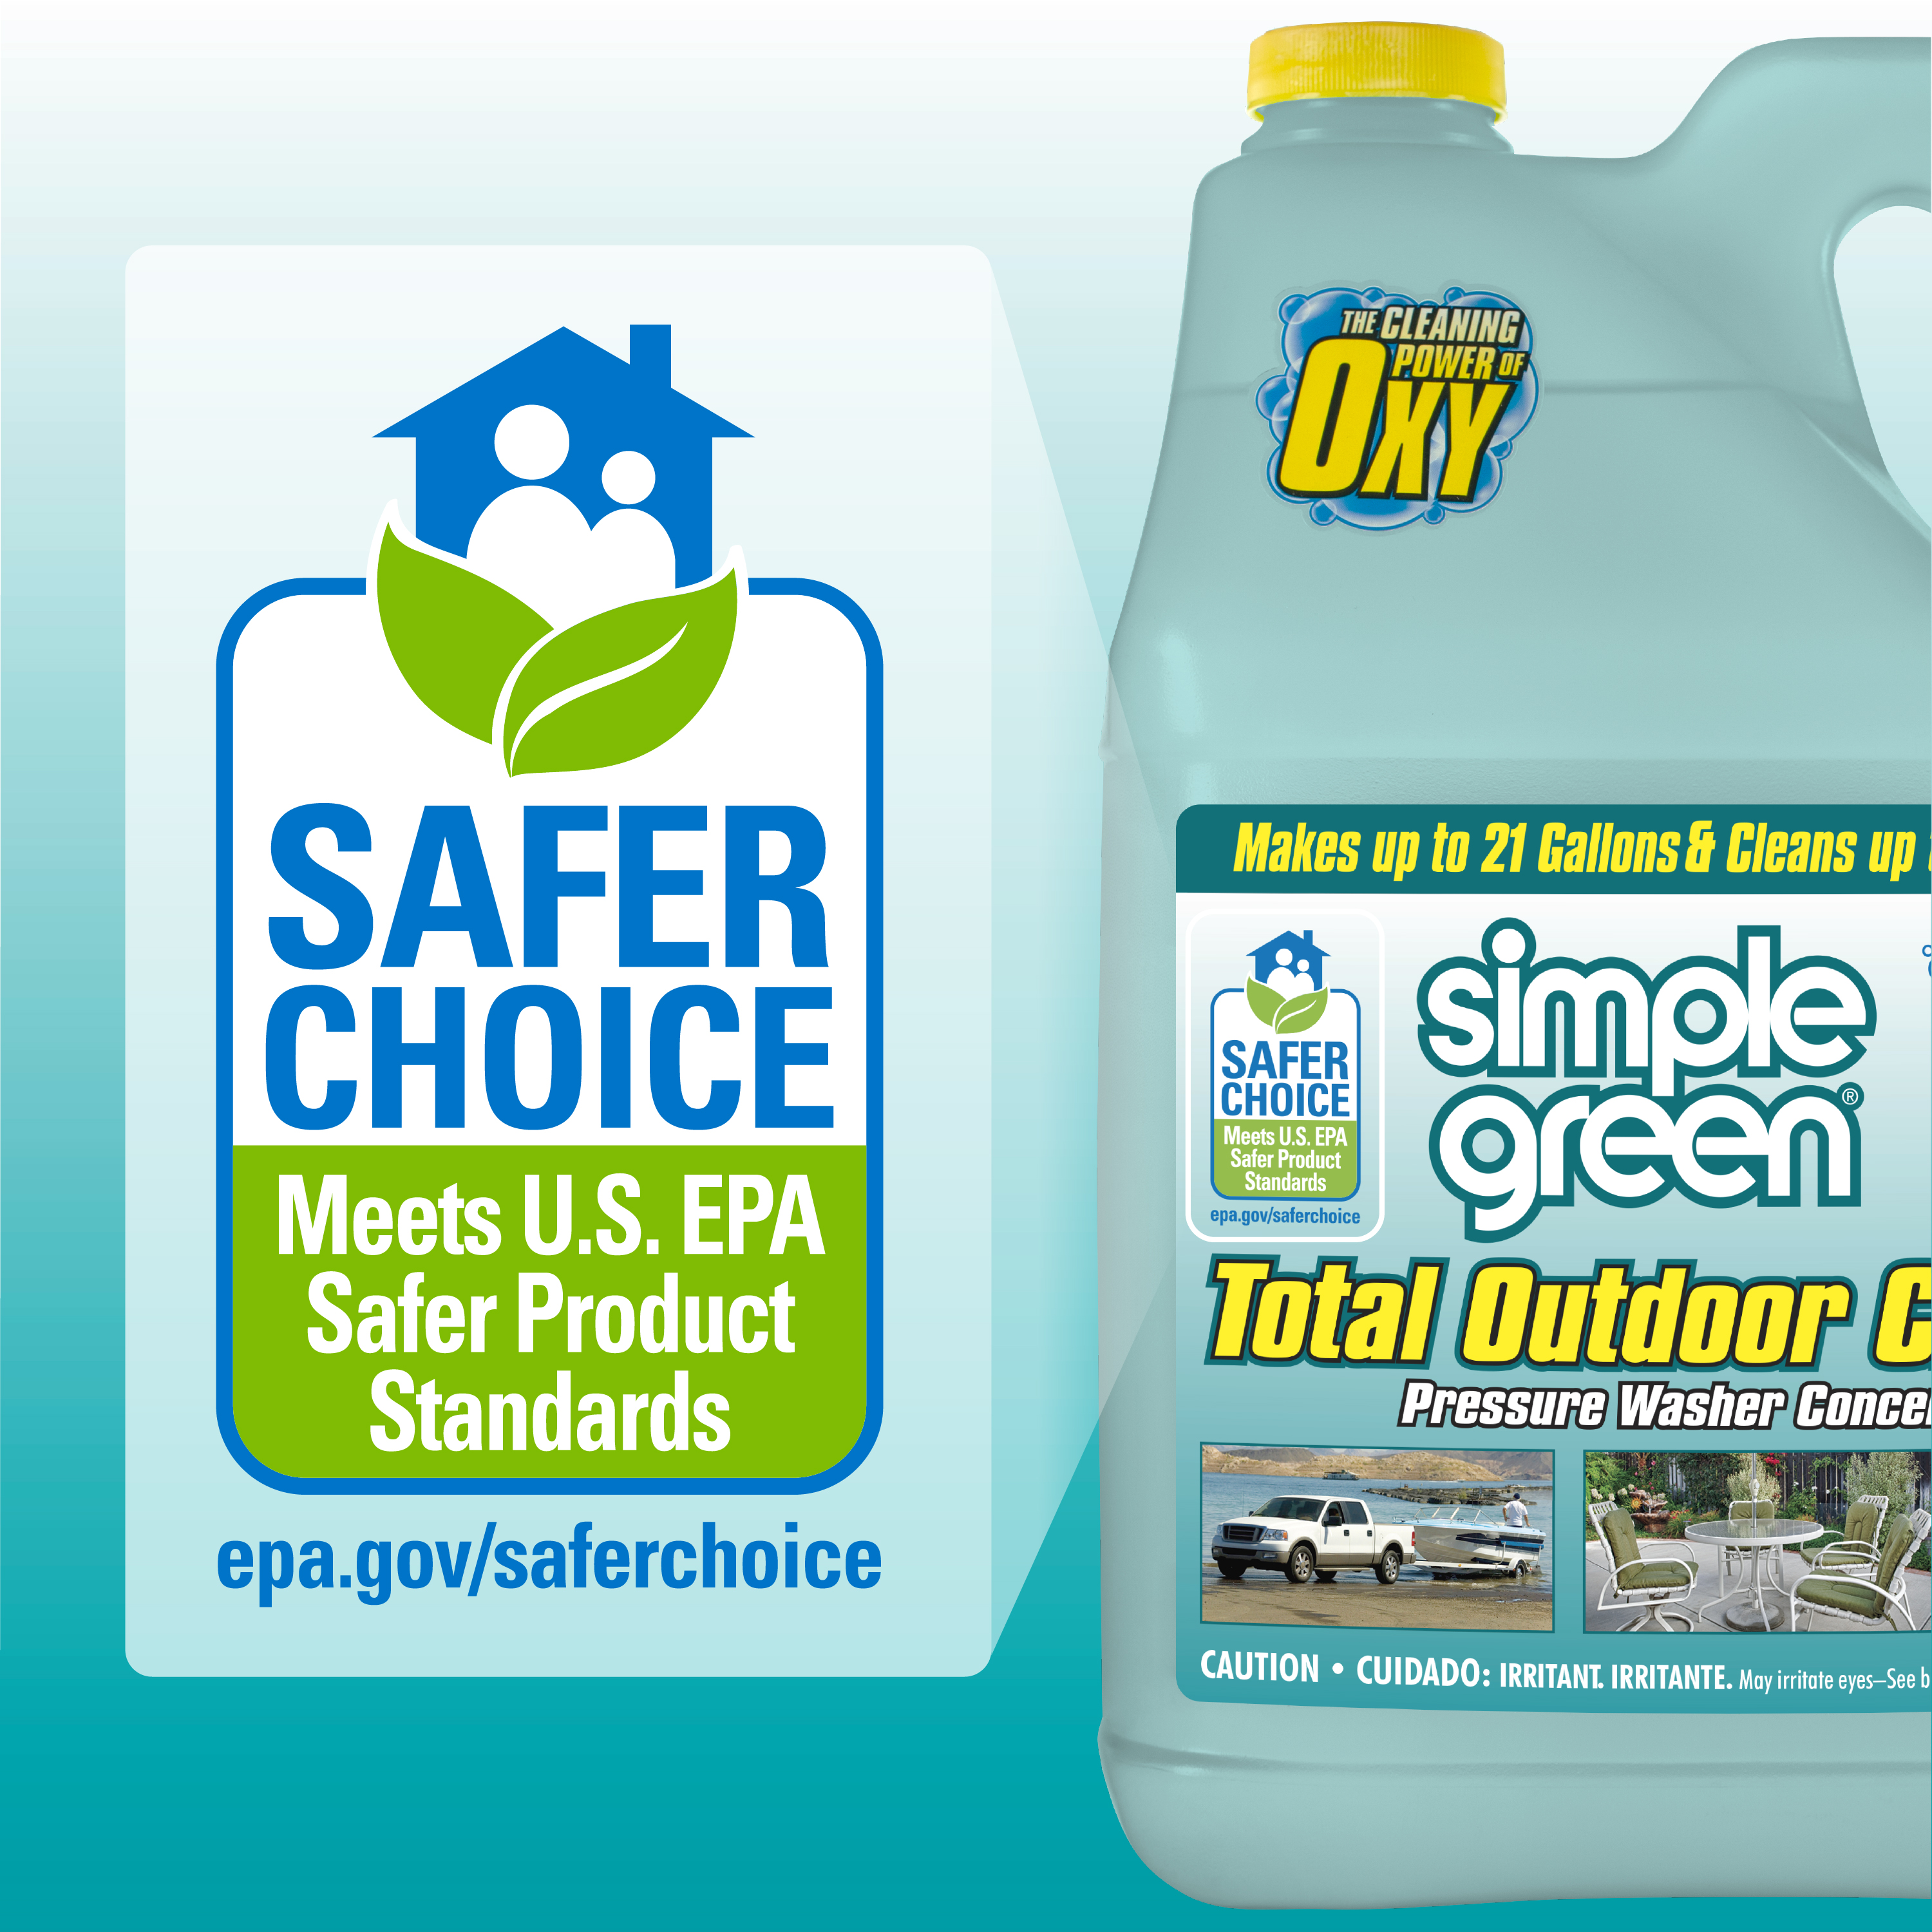 Simple Green Oxy Solve Total Outdoor Pressure Washer Concentrate - image 4 of 8